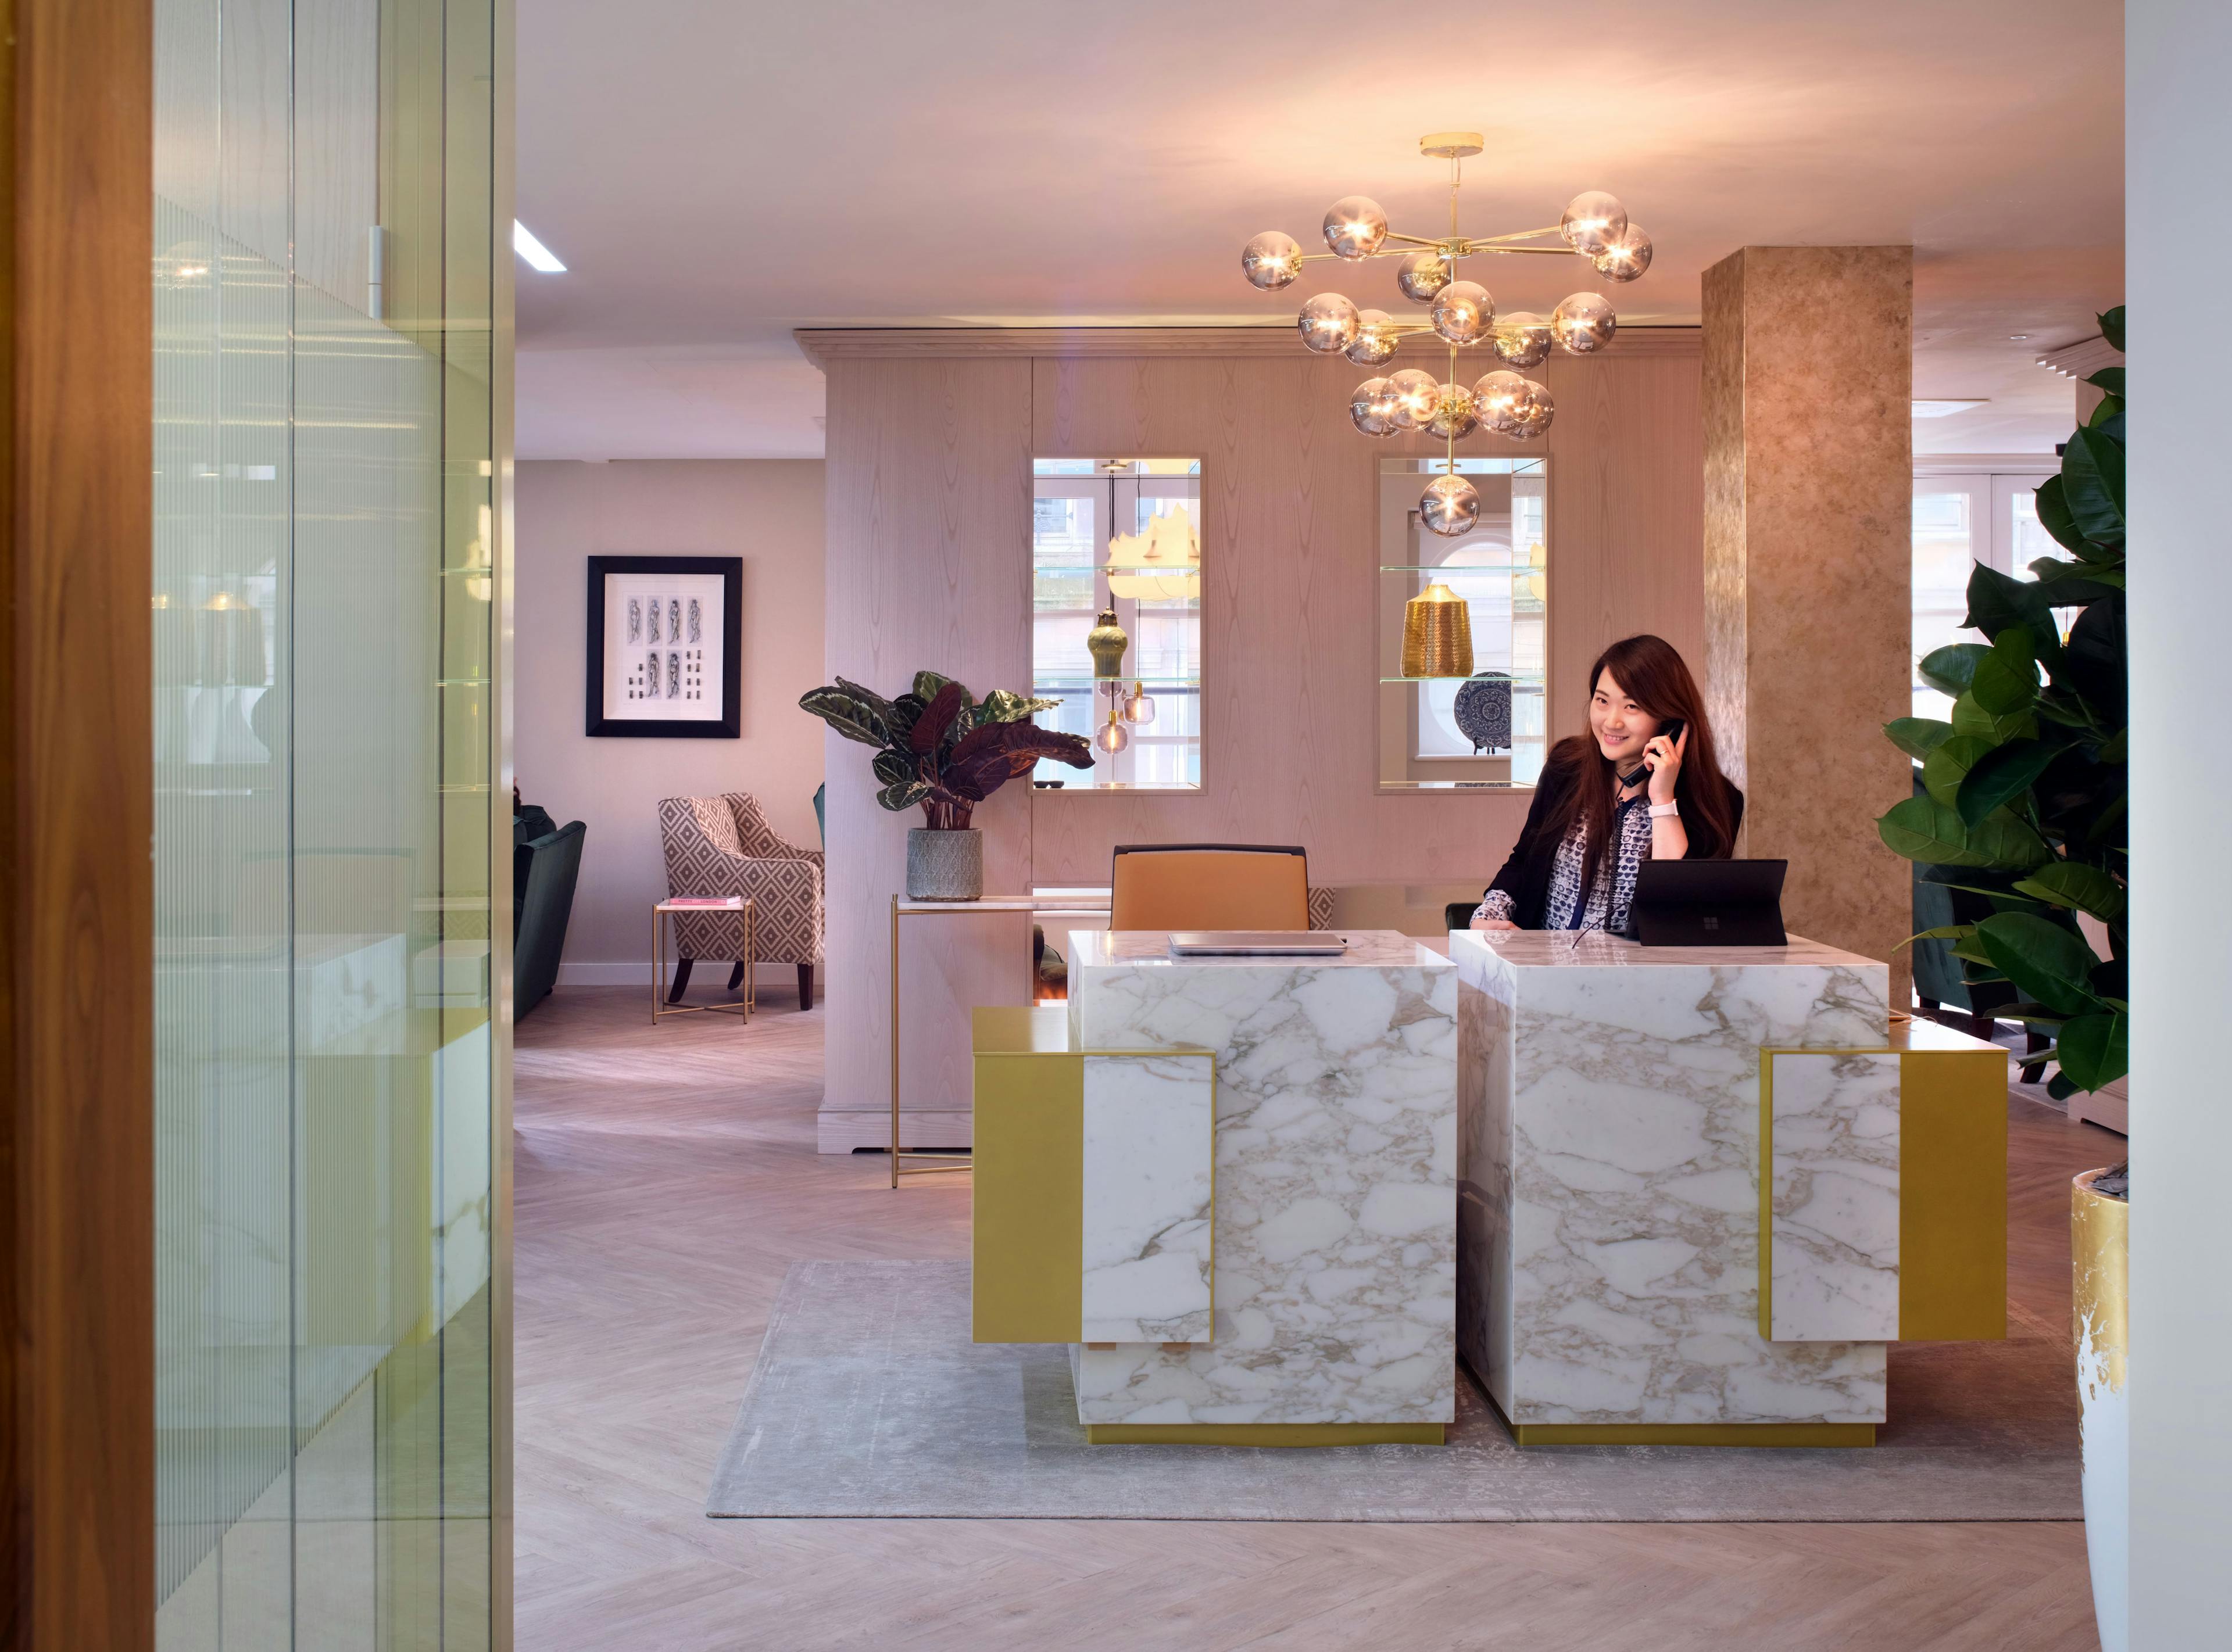 Mayfair – 40 Person Office - Hanover Square